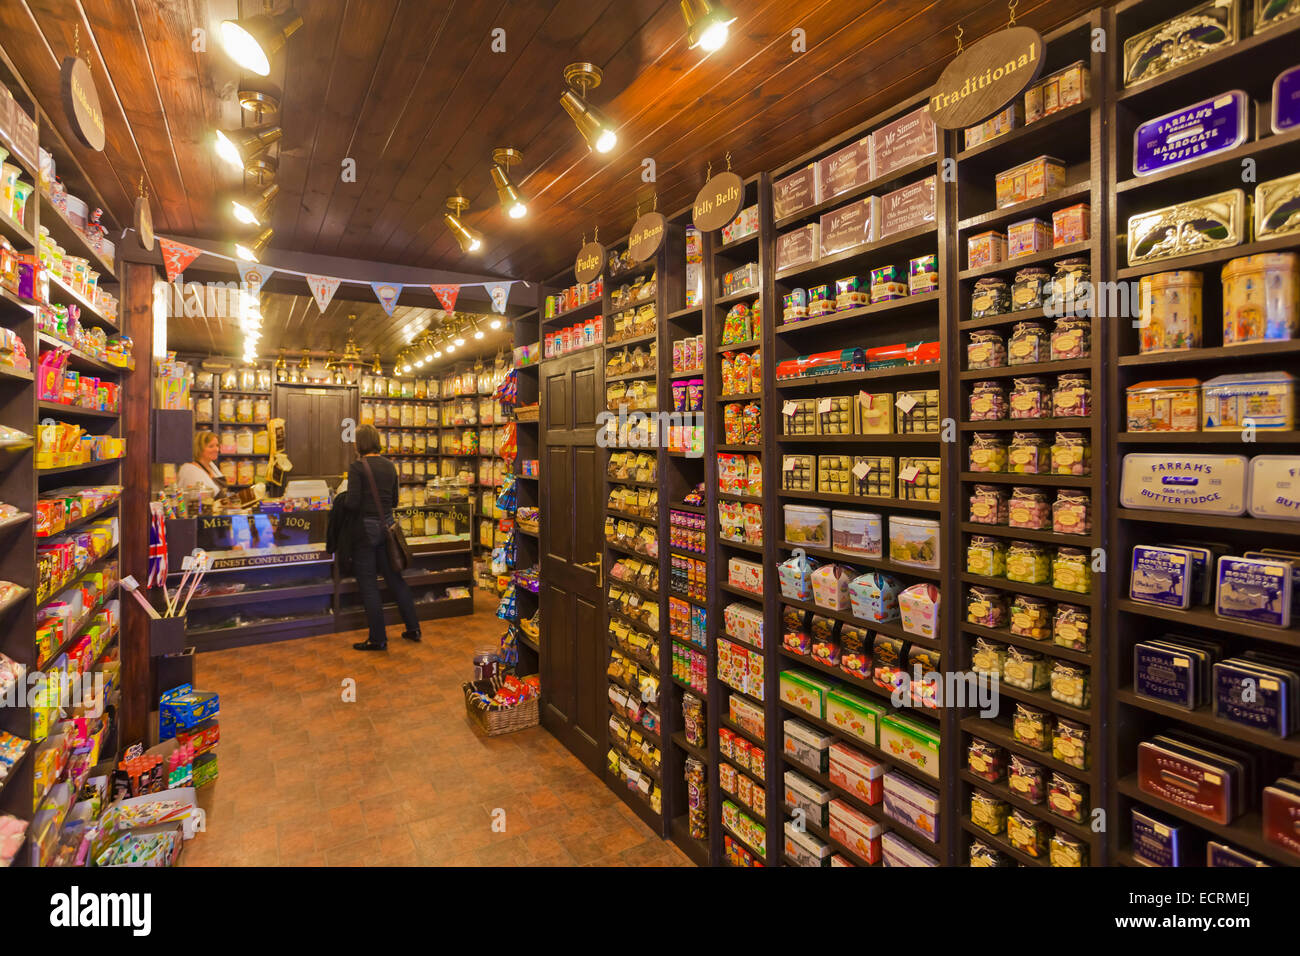 CONFECTIONERY, CANDIES, SWEETNESS IN  MR. SIMMS OLDE SWEET SHOPPE,  WORTHING, SEASIDE RESORT, SUSSEX, ENGLAND, GREAT BRITAIN Stock Photo